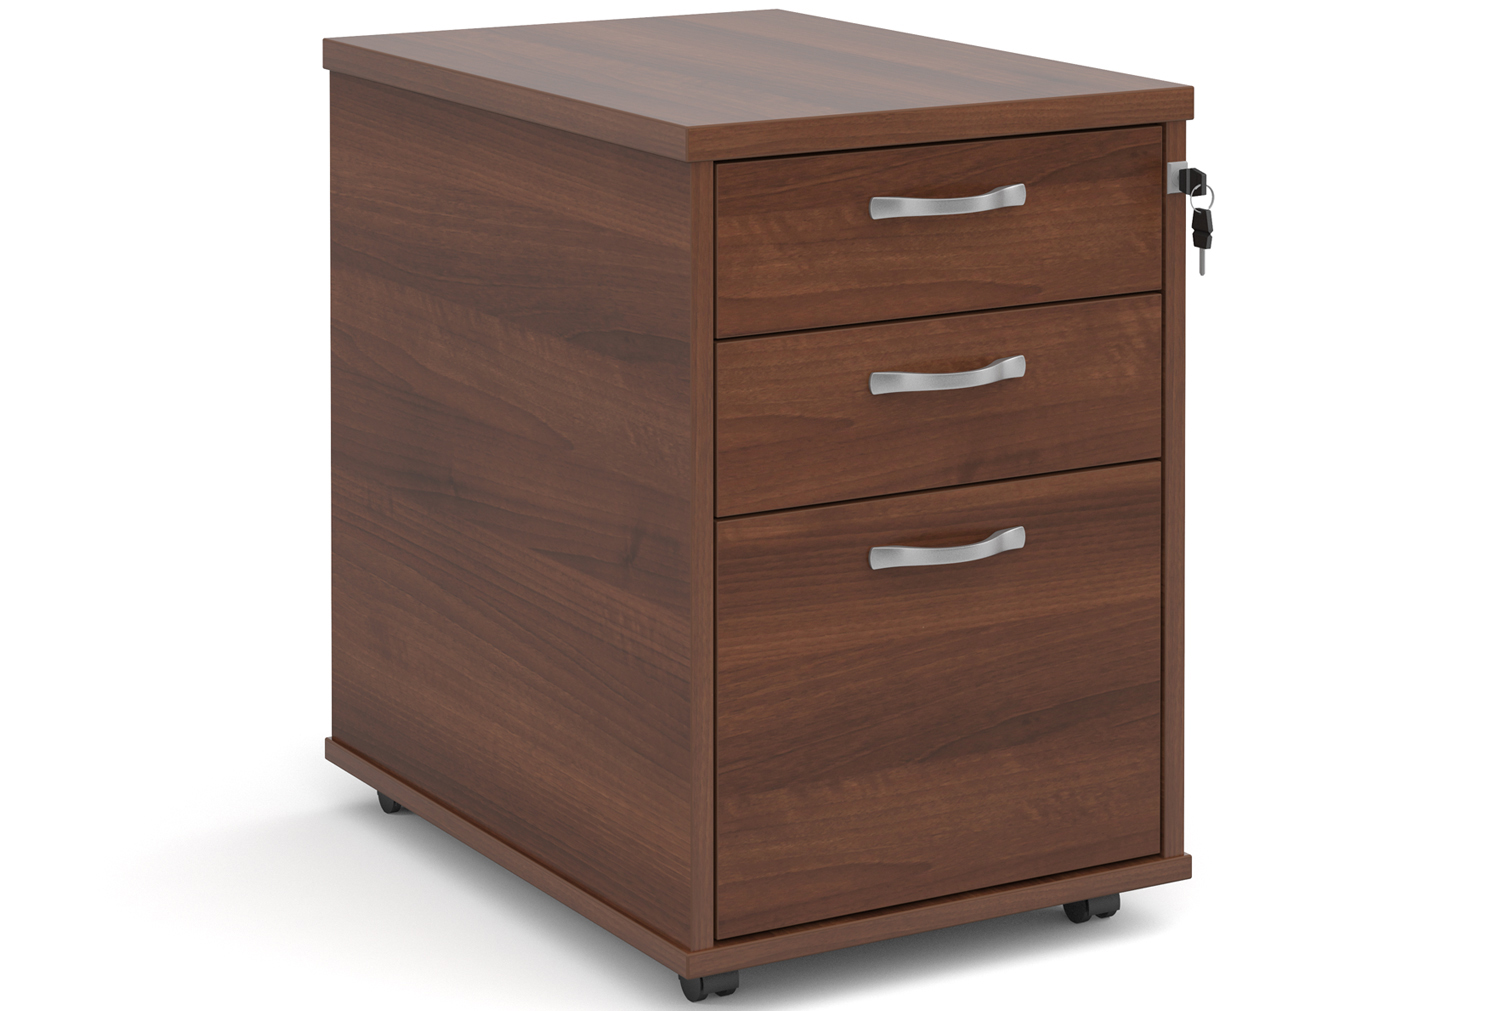 All Walnut Tall Mobile 3 Drawer Pedestal, Express Delivery